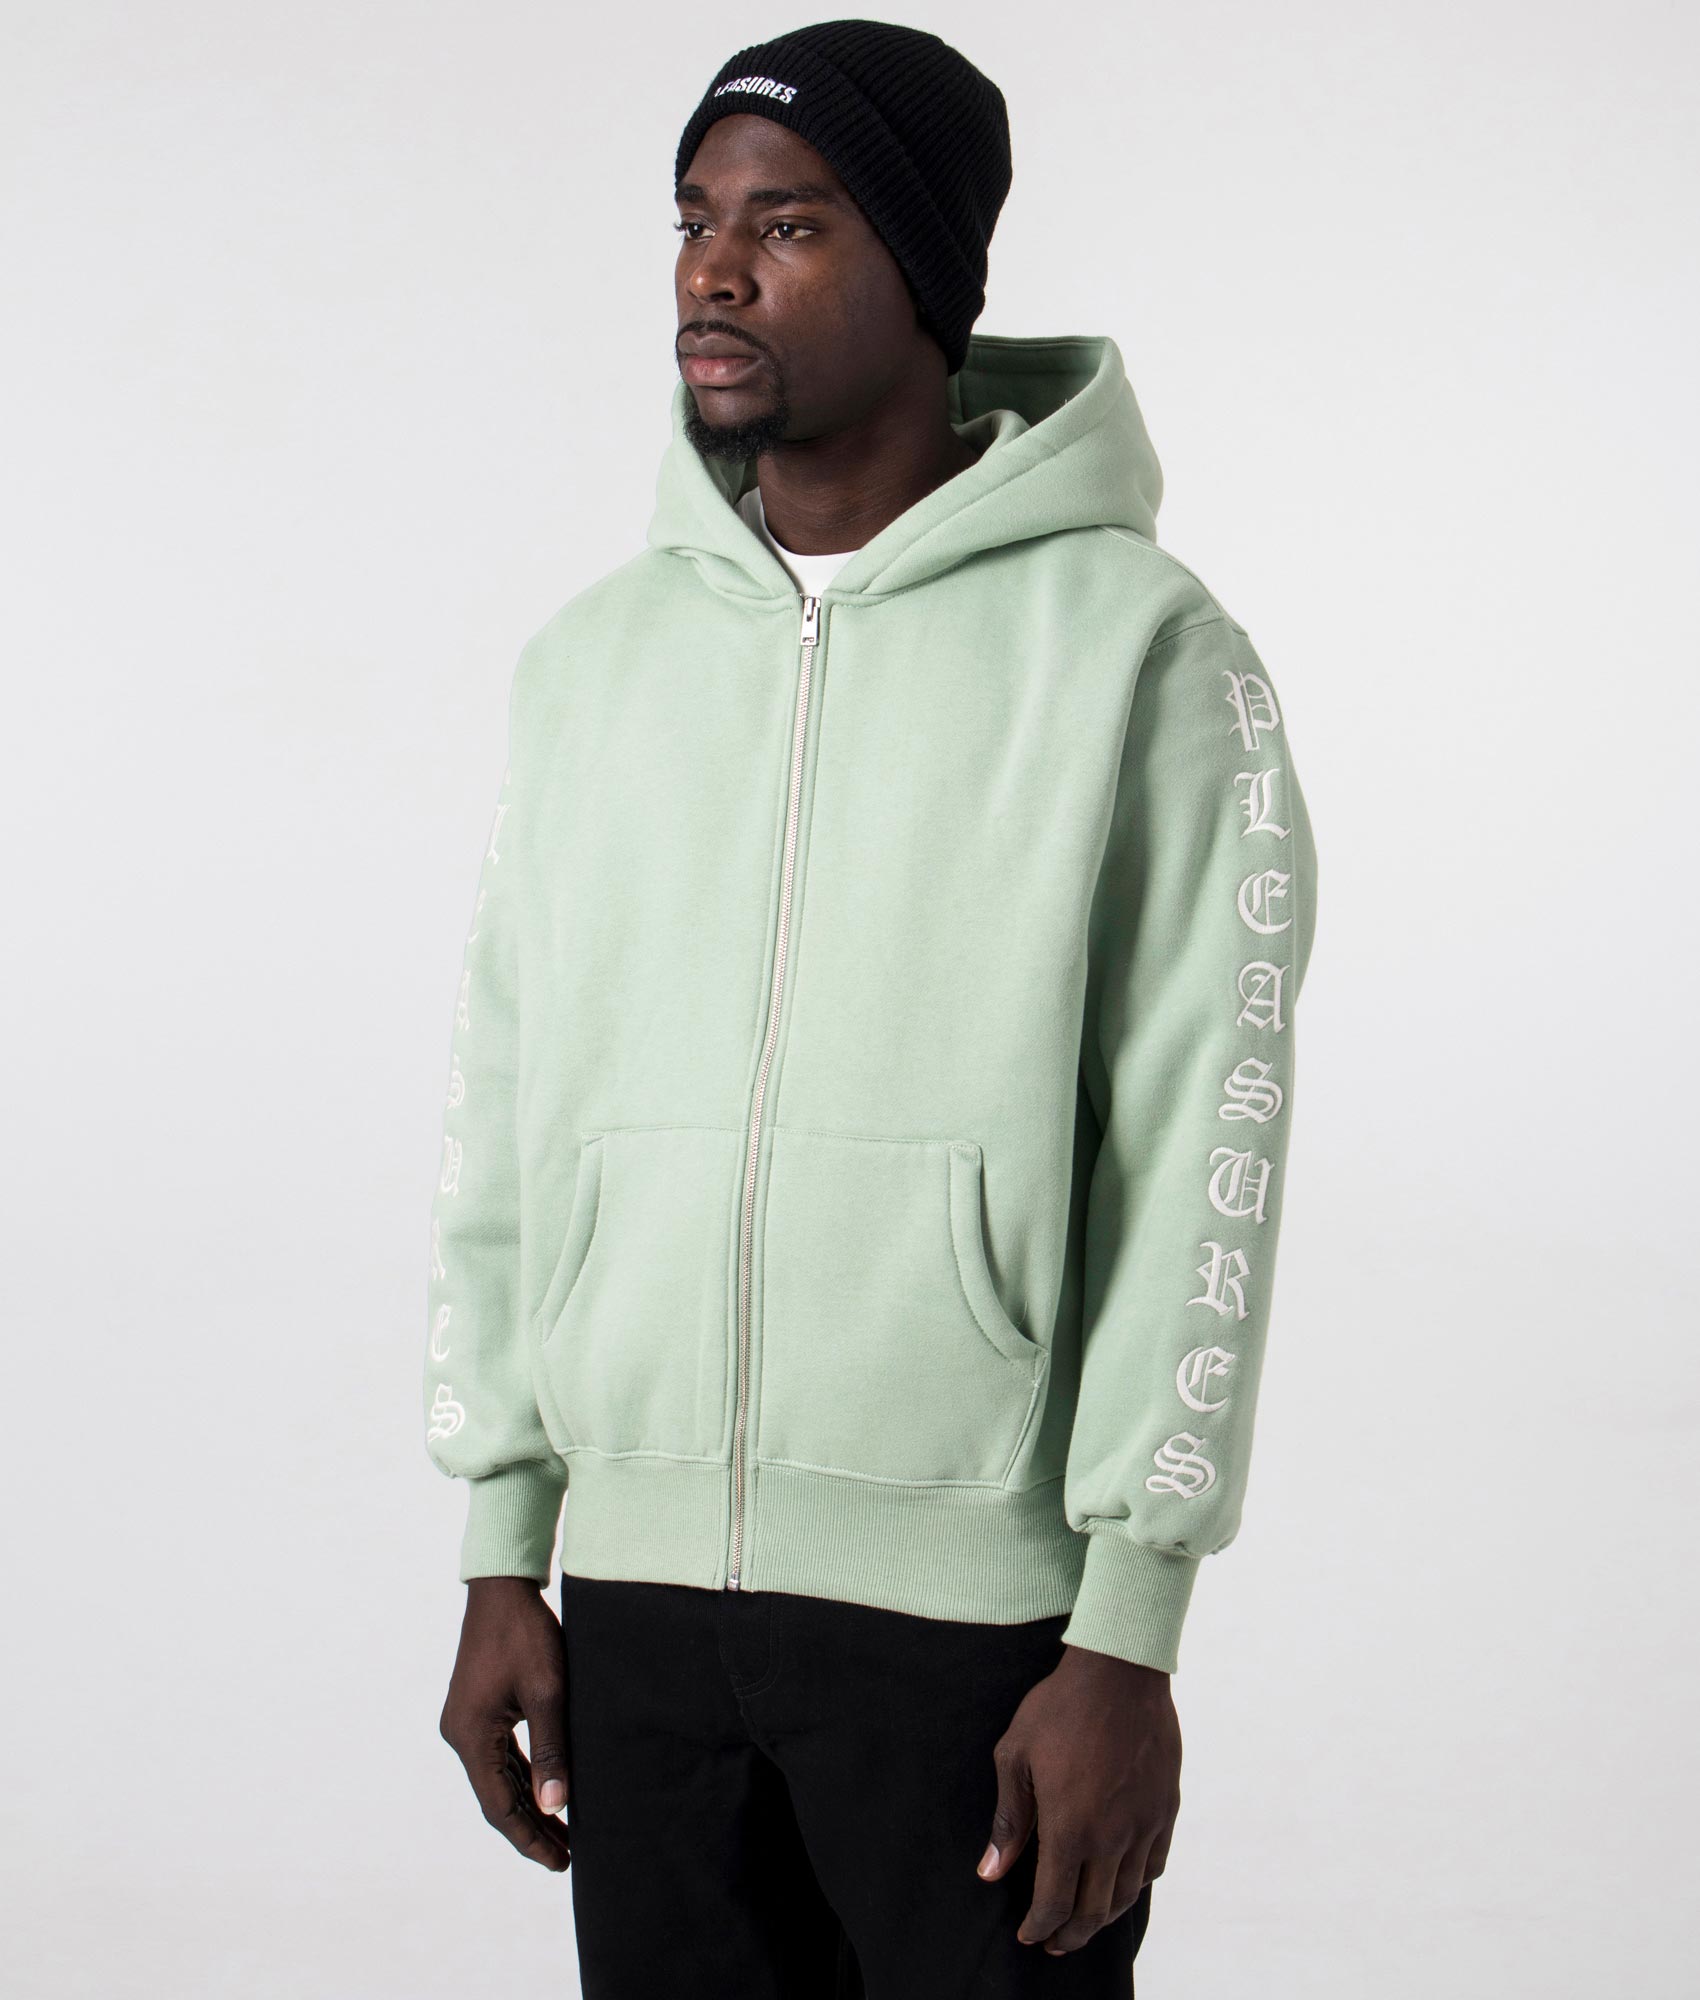 Pleasures Mens Relaxed Fit Oe Zip Up Hoodie - Colour: Matcha - Size: Large